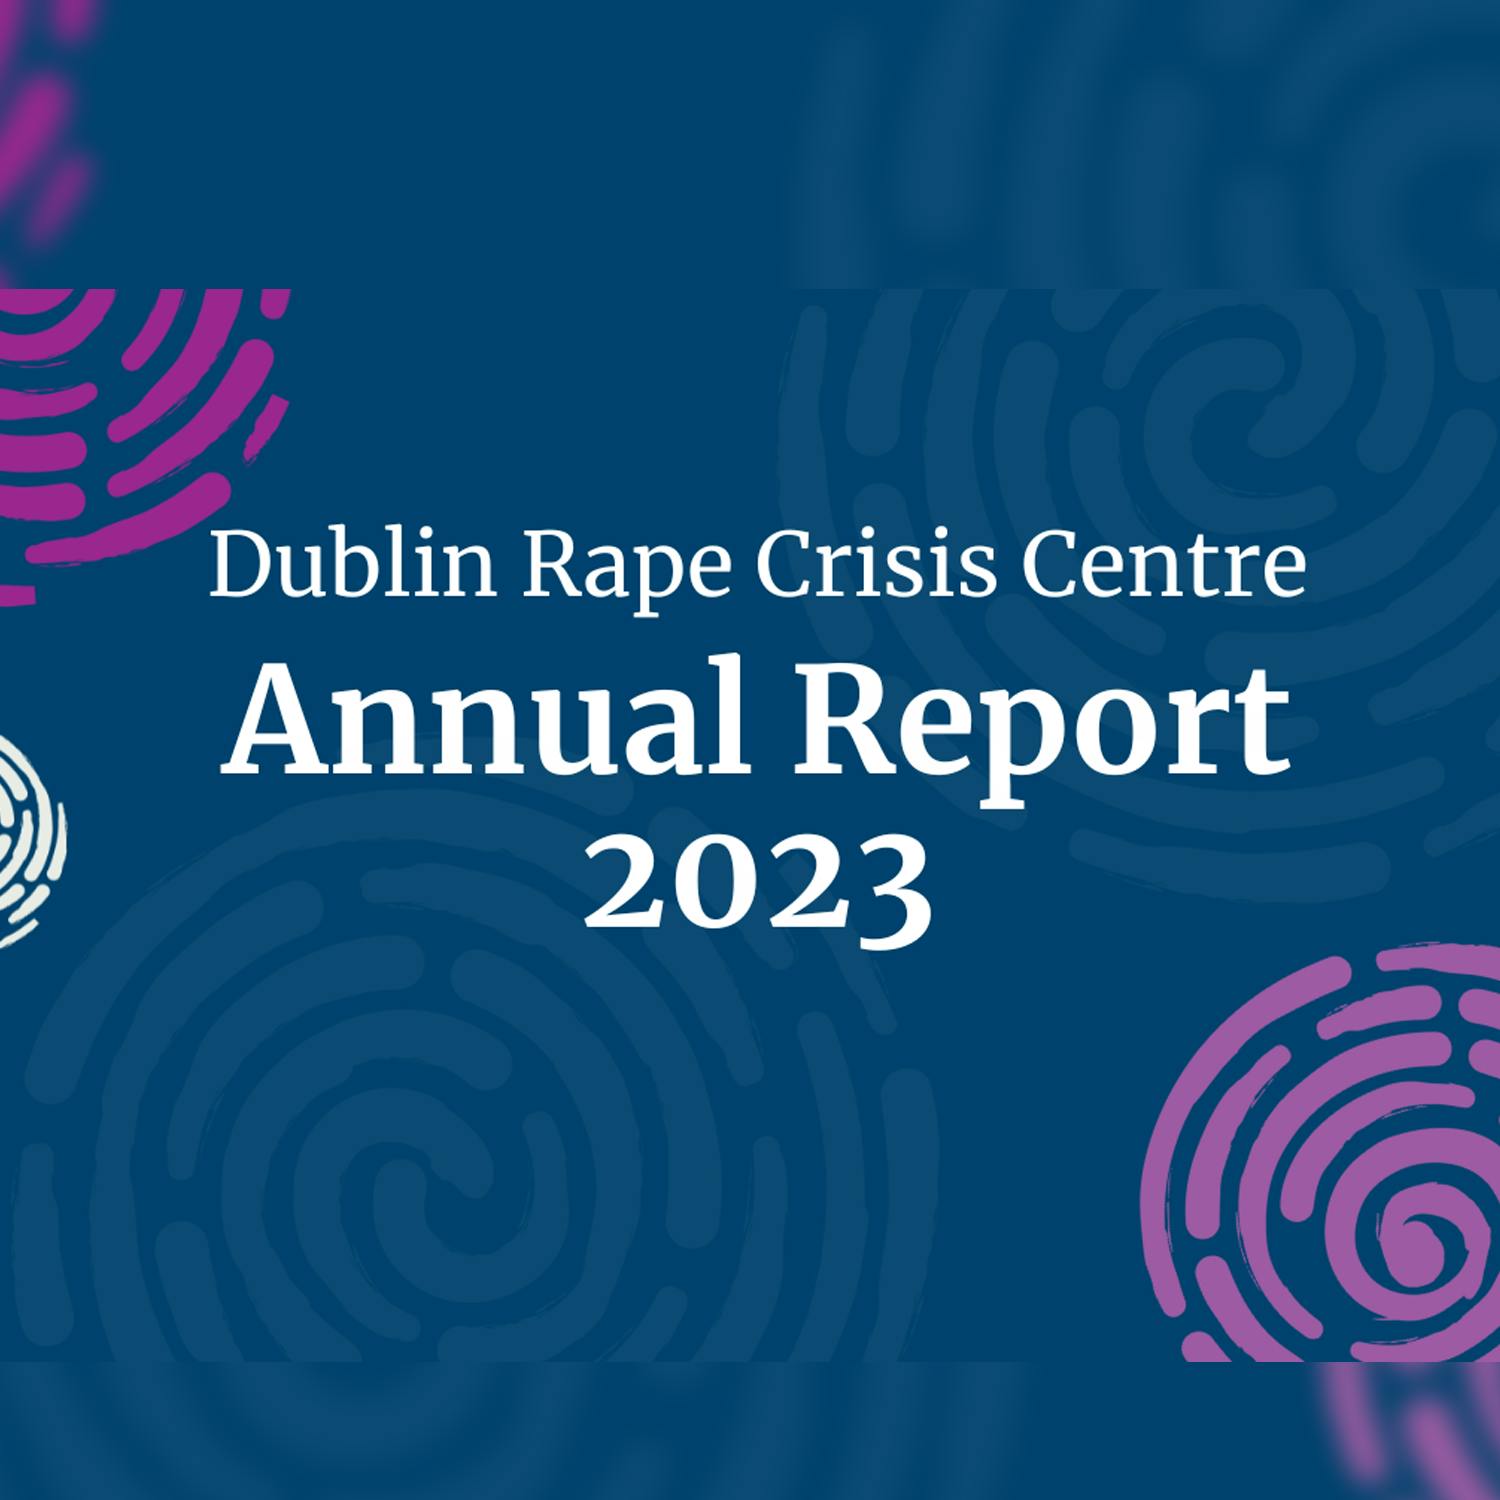 Record number of calls made to Dublin Rape Crisis Centre last year